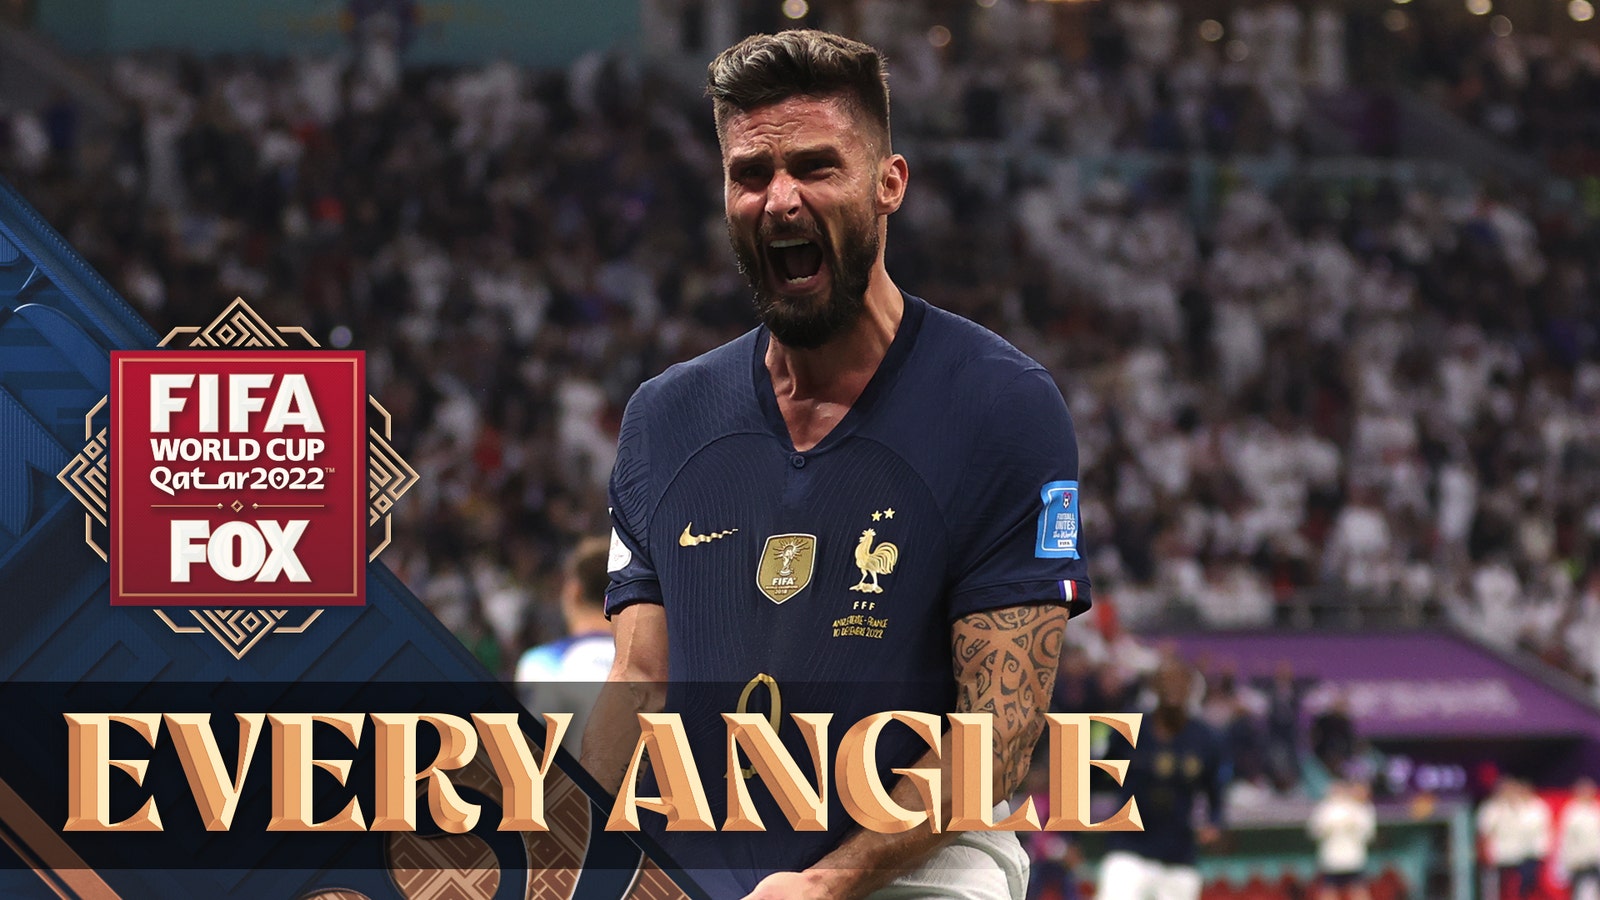 Olivier Giroud makes an incredible header with the France national team in the 2022 FIFA World Cup |  every corner